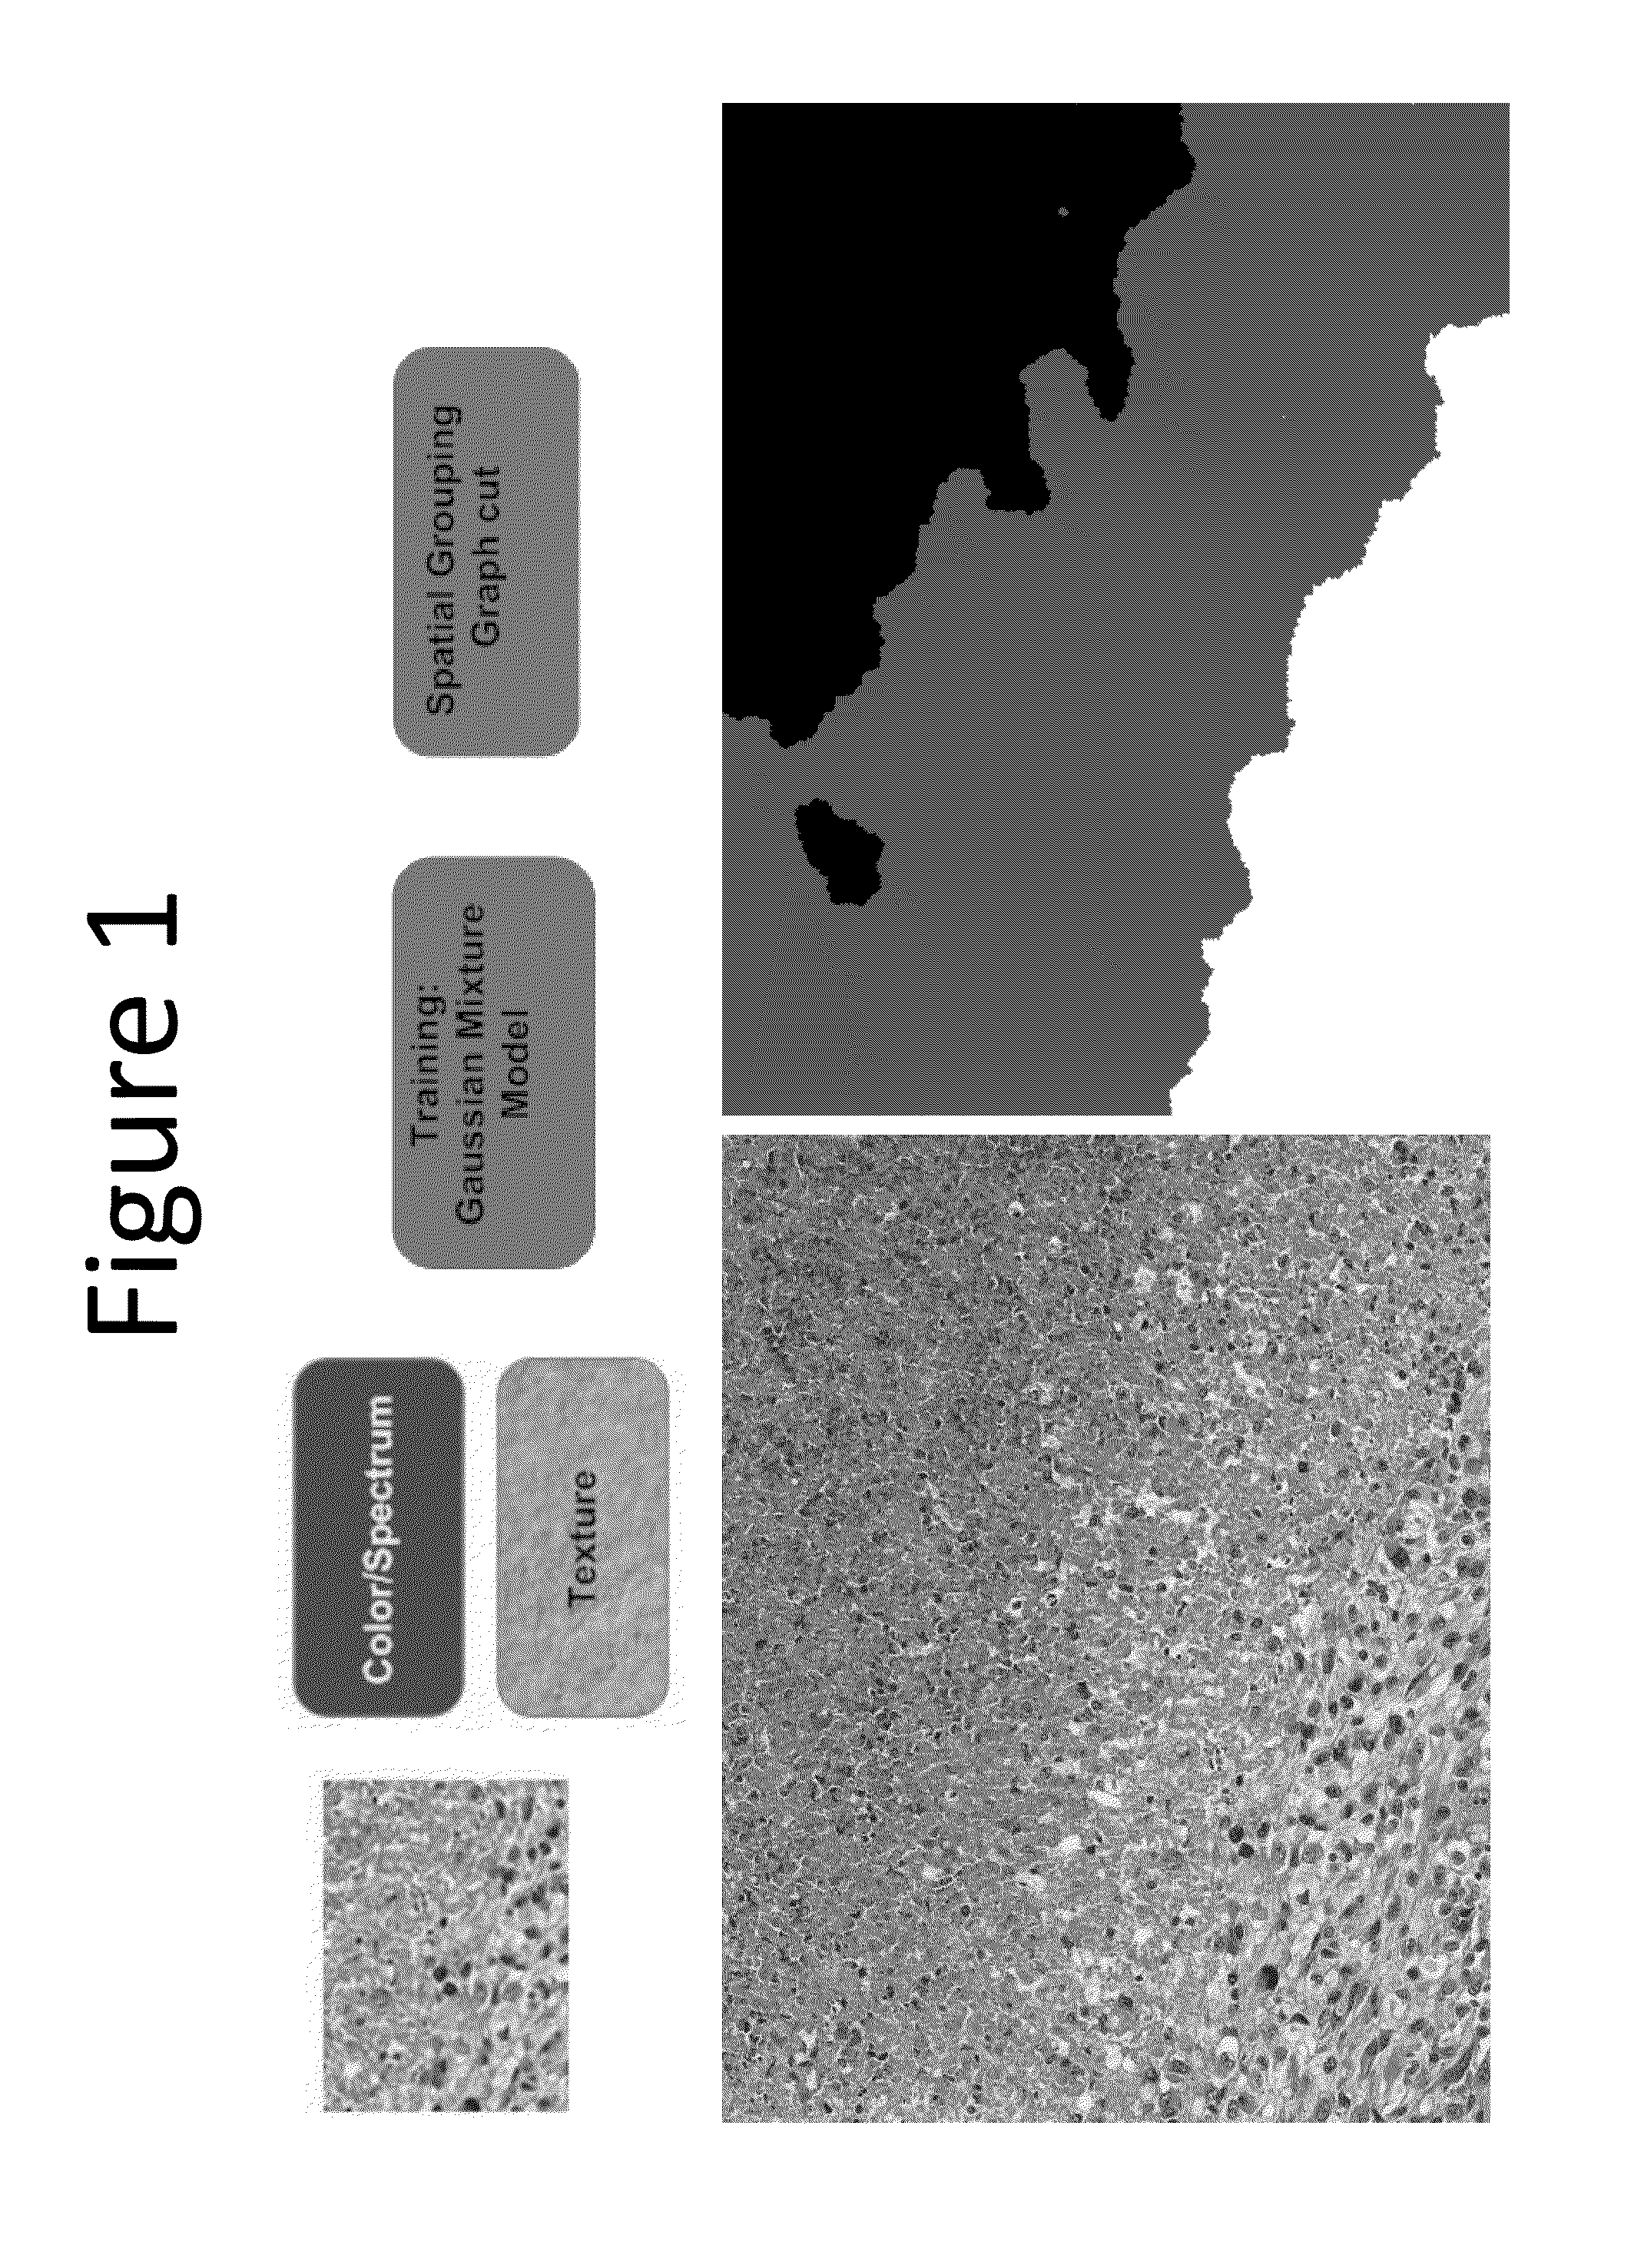 Methods for delineating cellular regions and classifying regions of histopathology and microanatomy